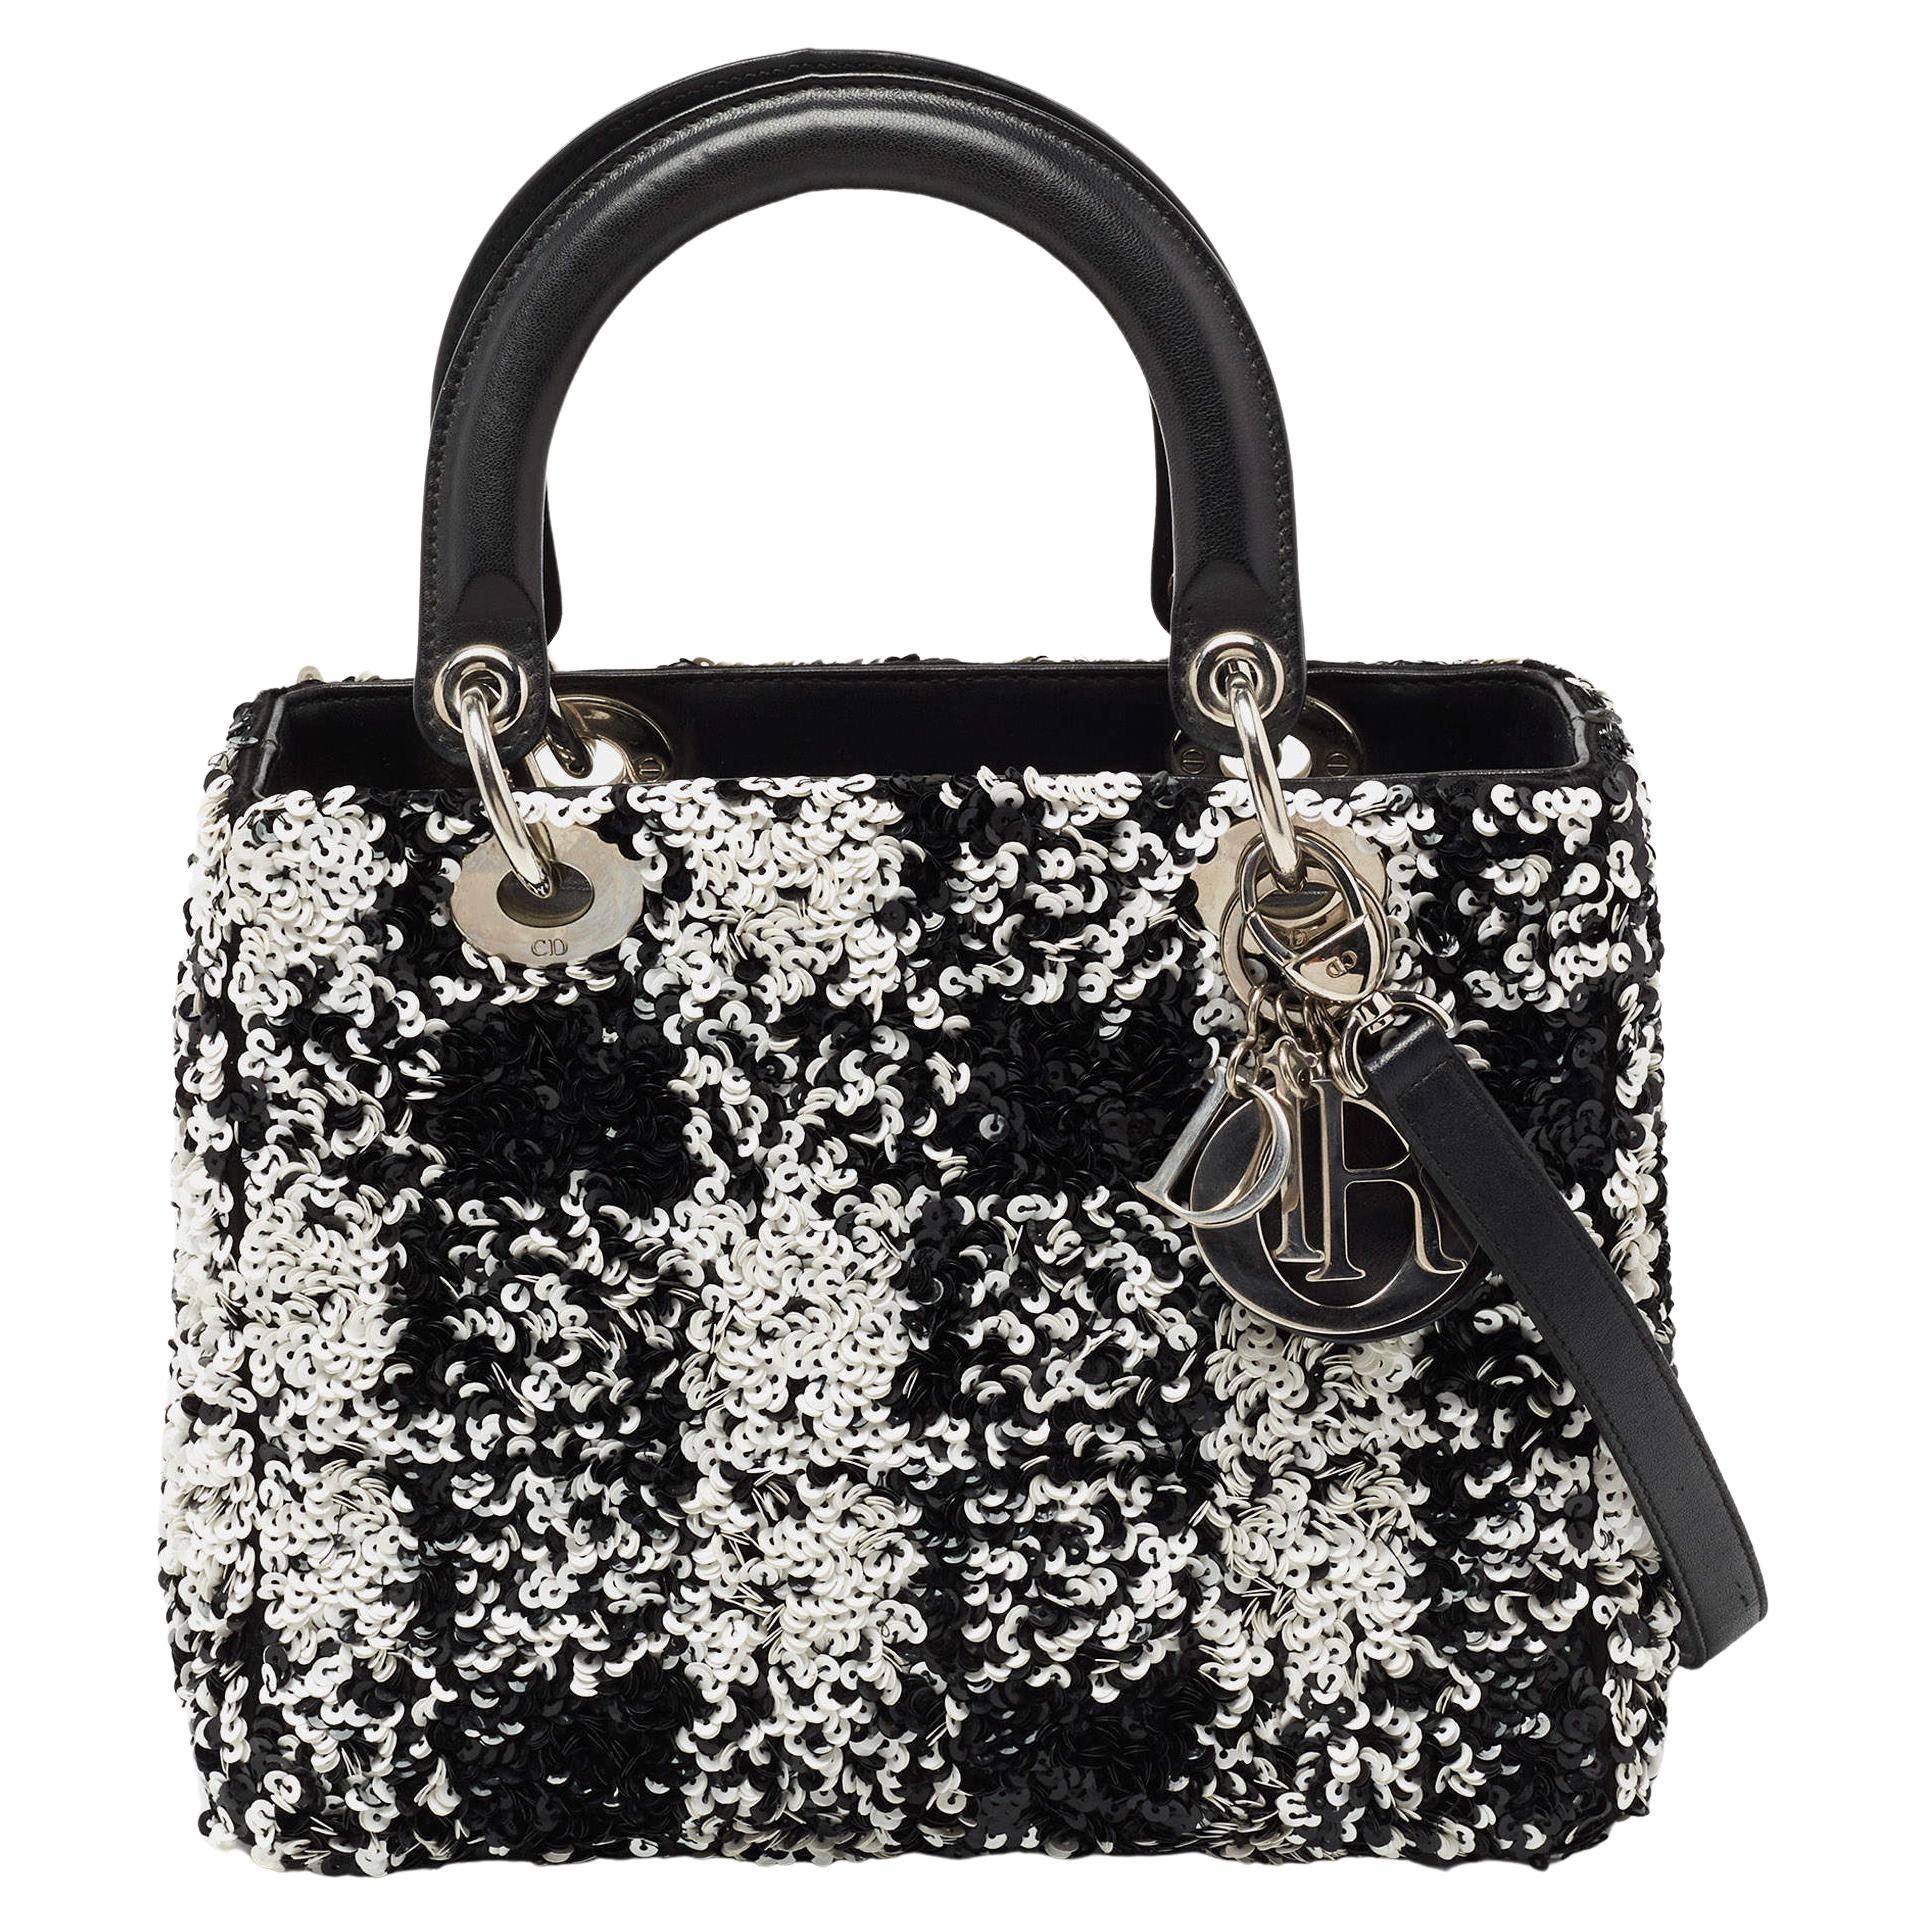 Dior Black/White Sequins and Leather Medium Lady Dior Tote